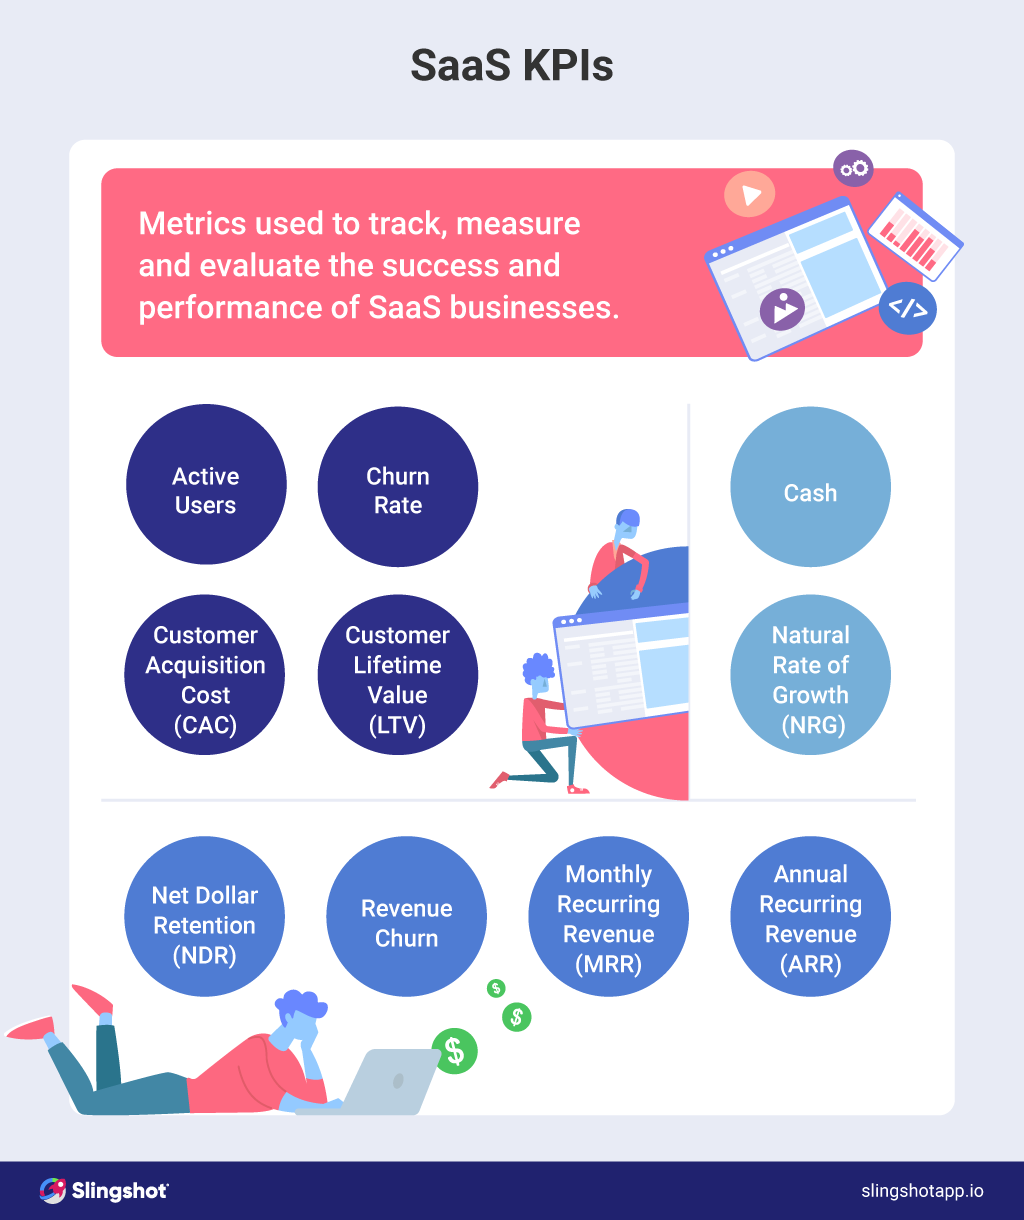 saas kpis you should track to grow your business